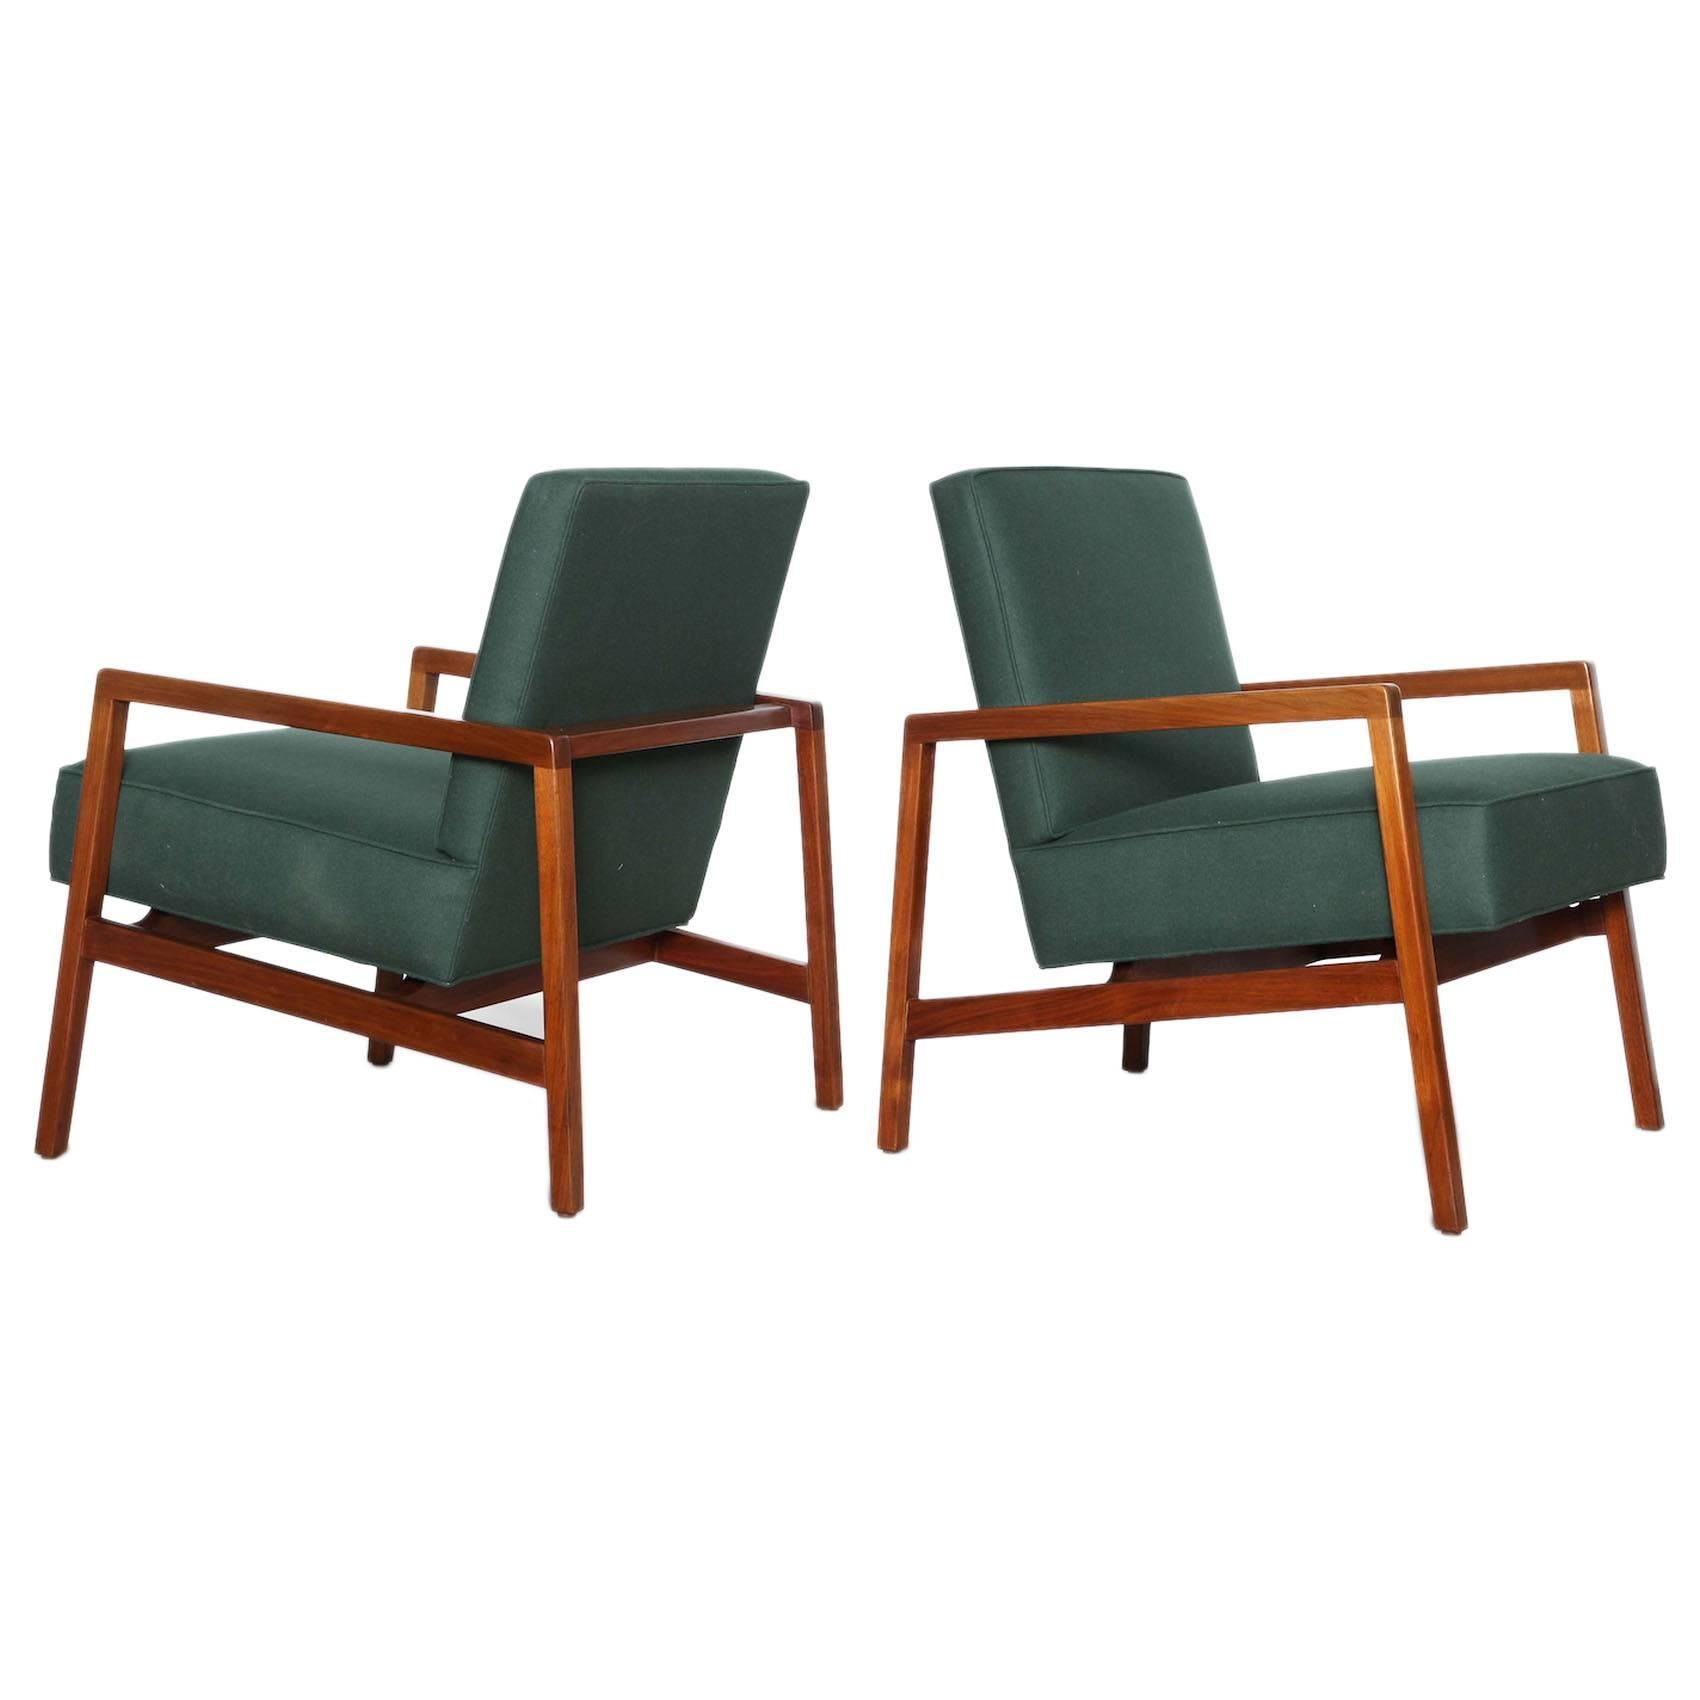 Pair of Open Armchairs by Lewis Butler for Knoll